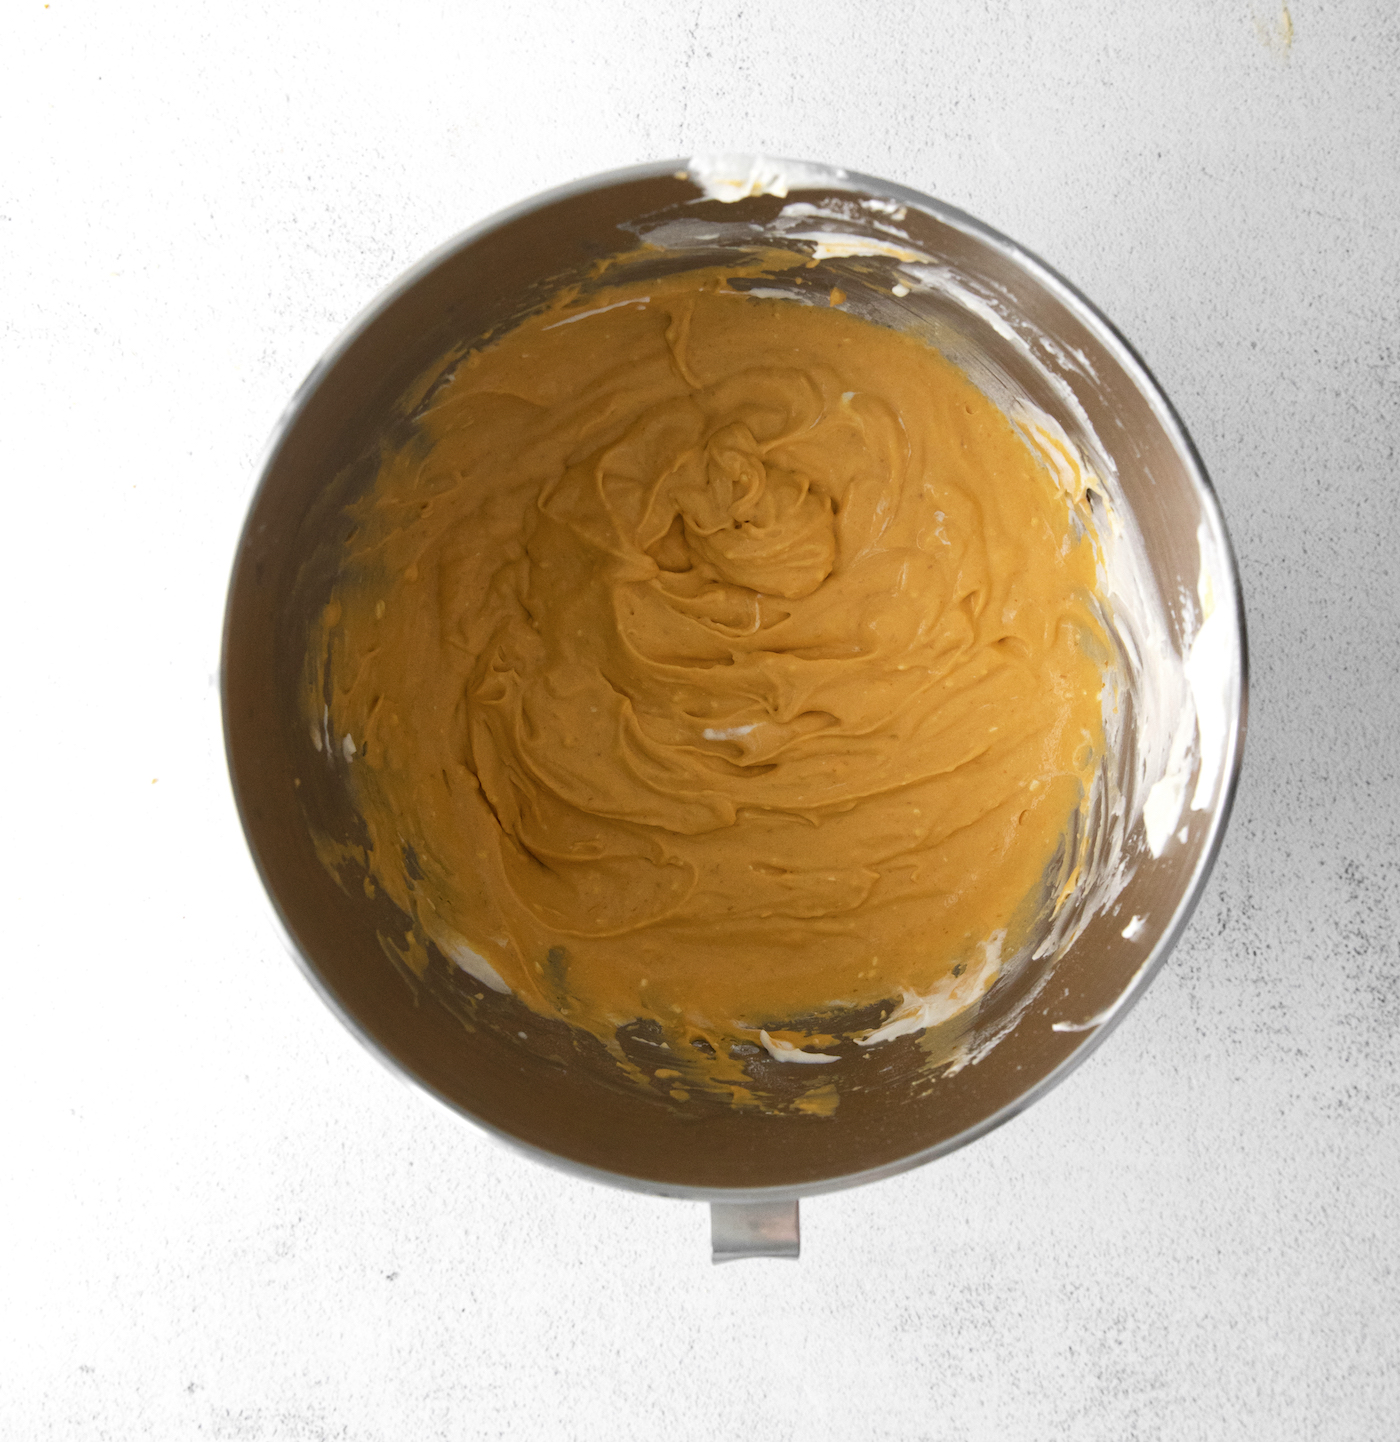 Pumpkin puree and cream cheese whipped together in a bowl